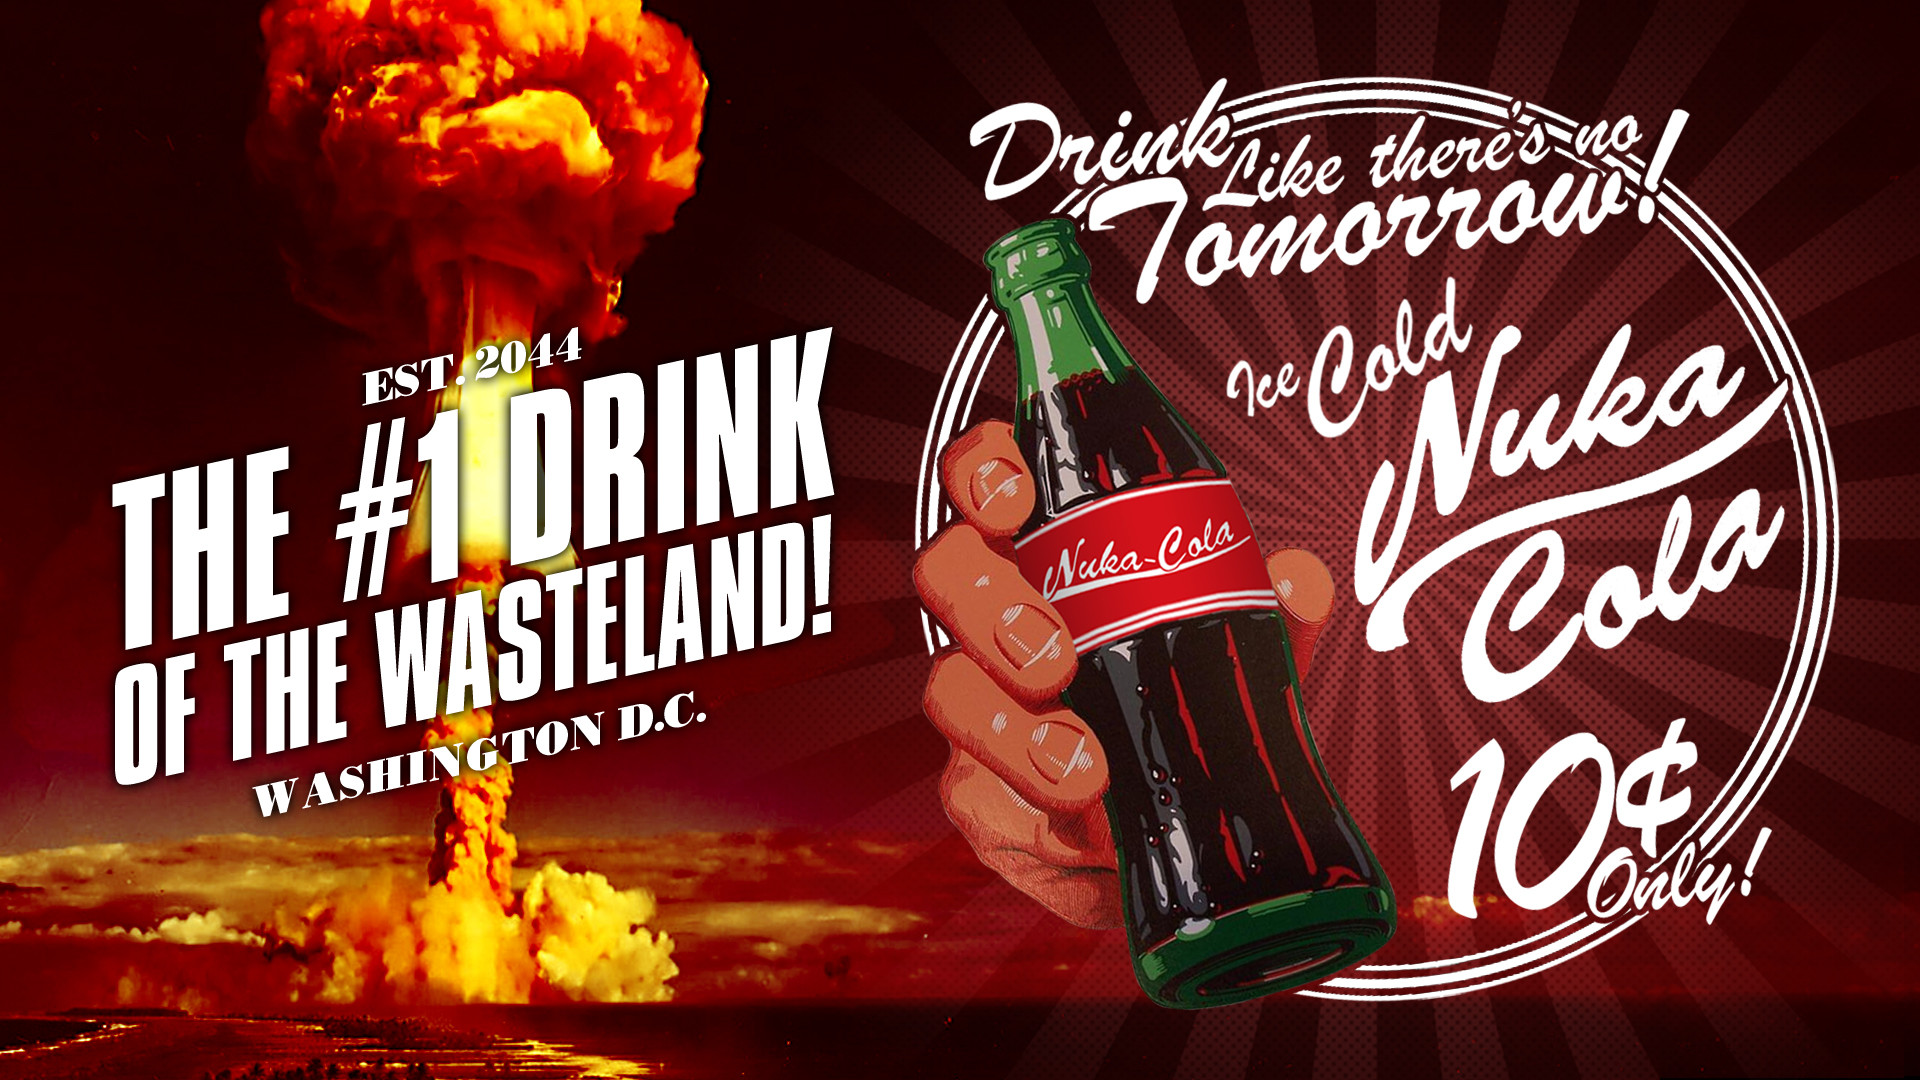 1920x1080 ... Nuka Cola - The #1 Drink of the Wasteland! by Potansky